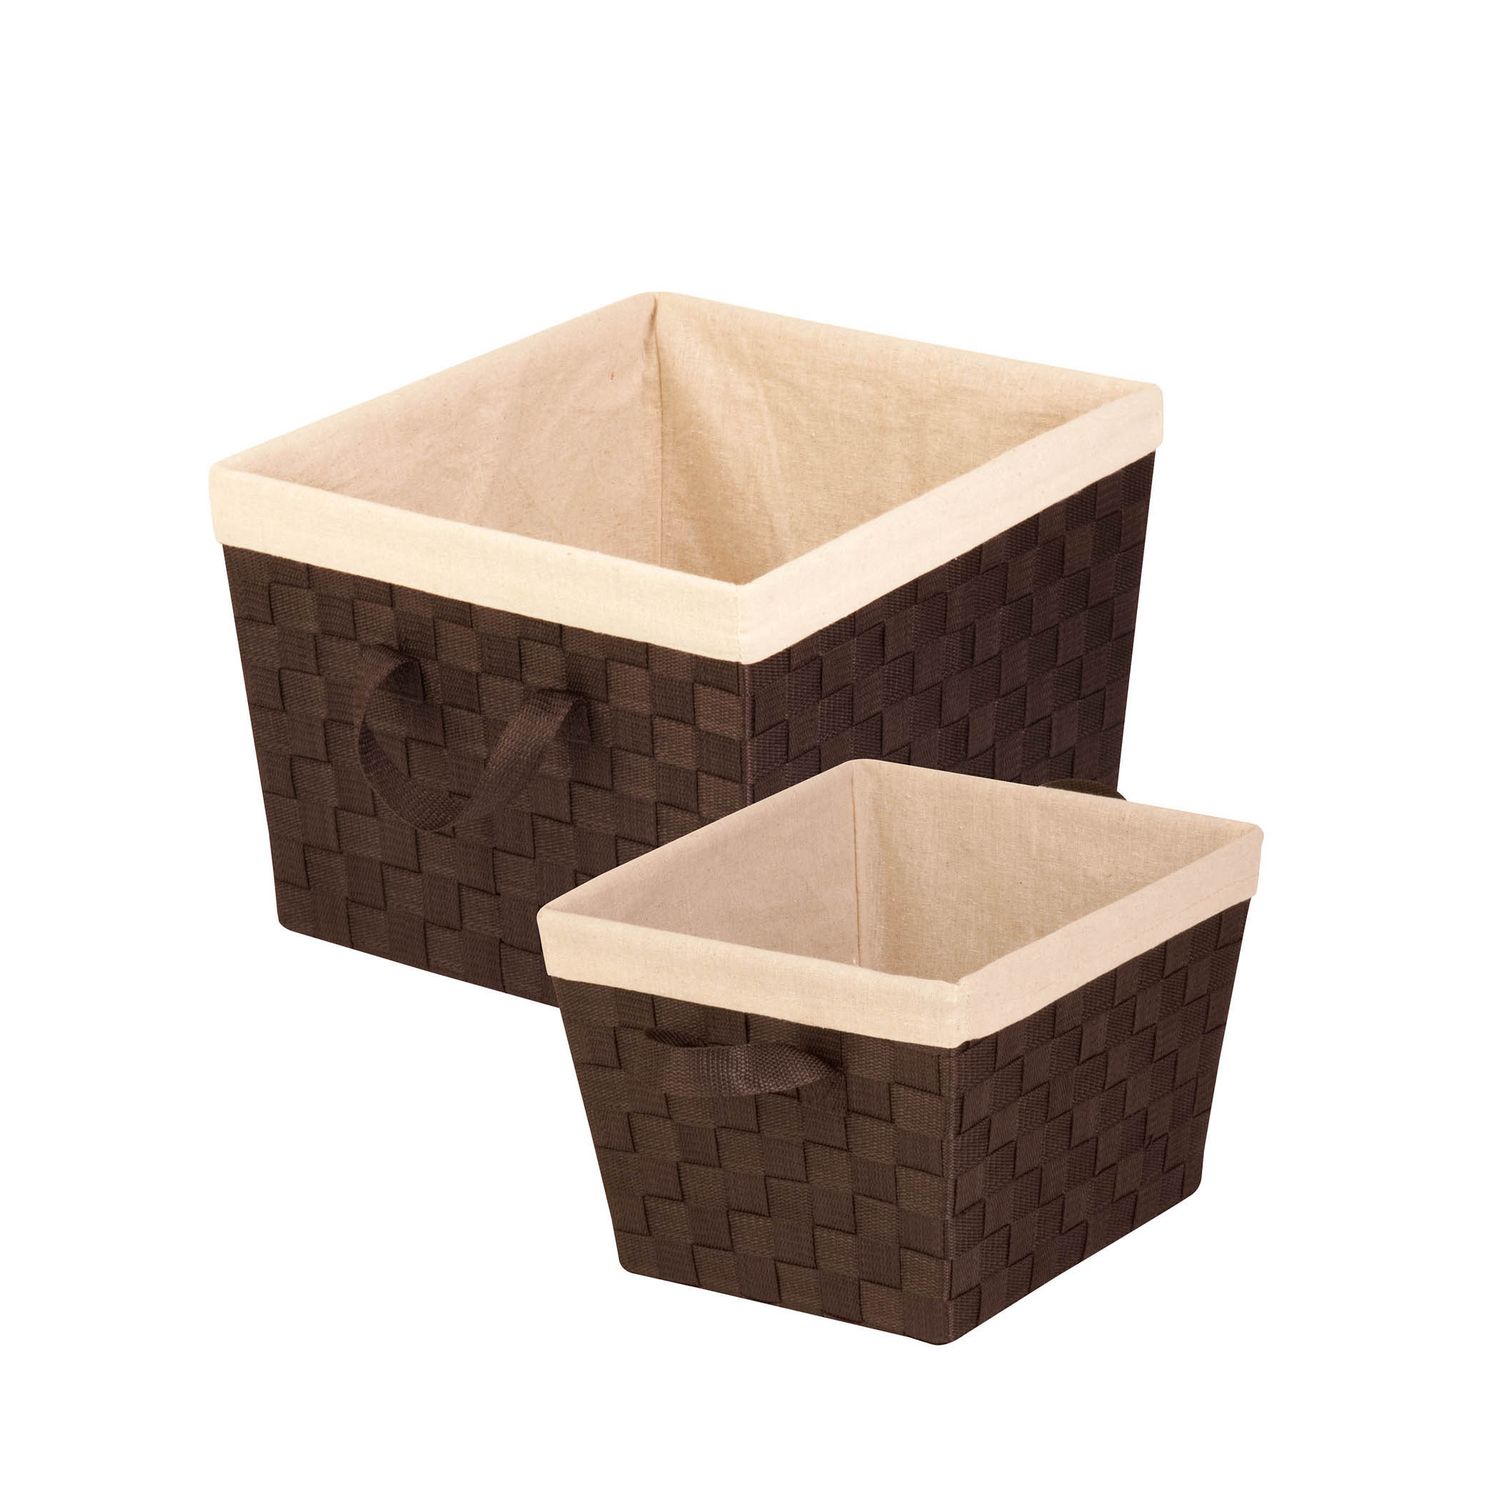 Image for Honey-Can-Do 2-piece Lined Woven Basket Set at Kohl's.